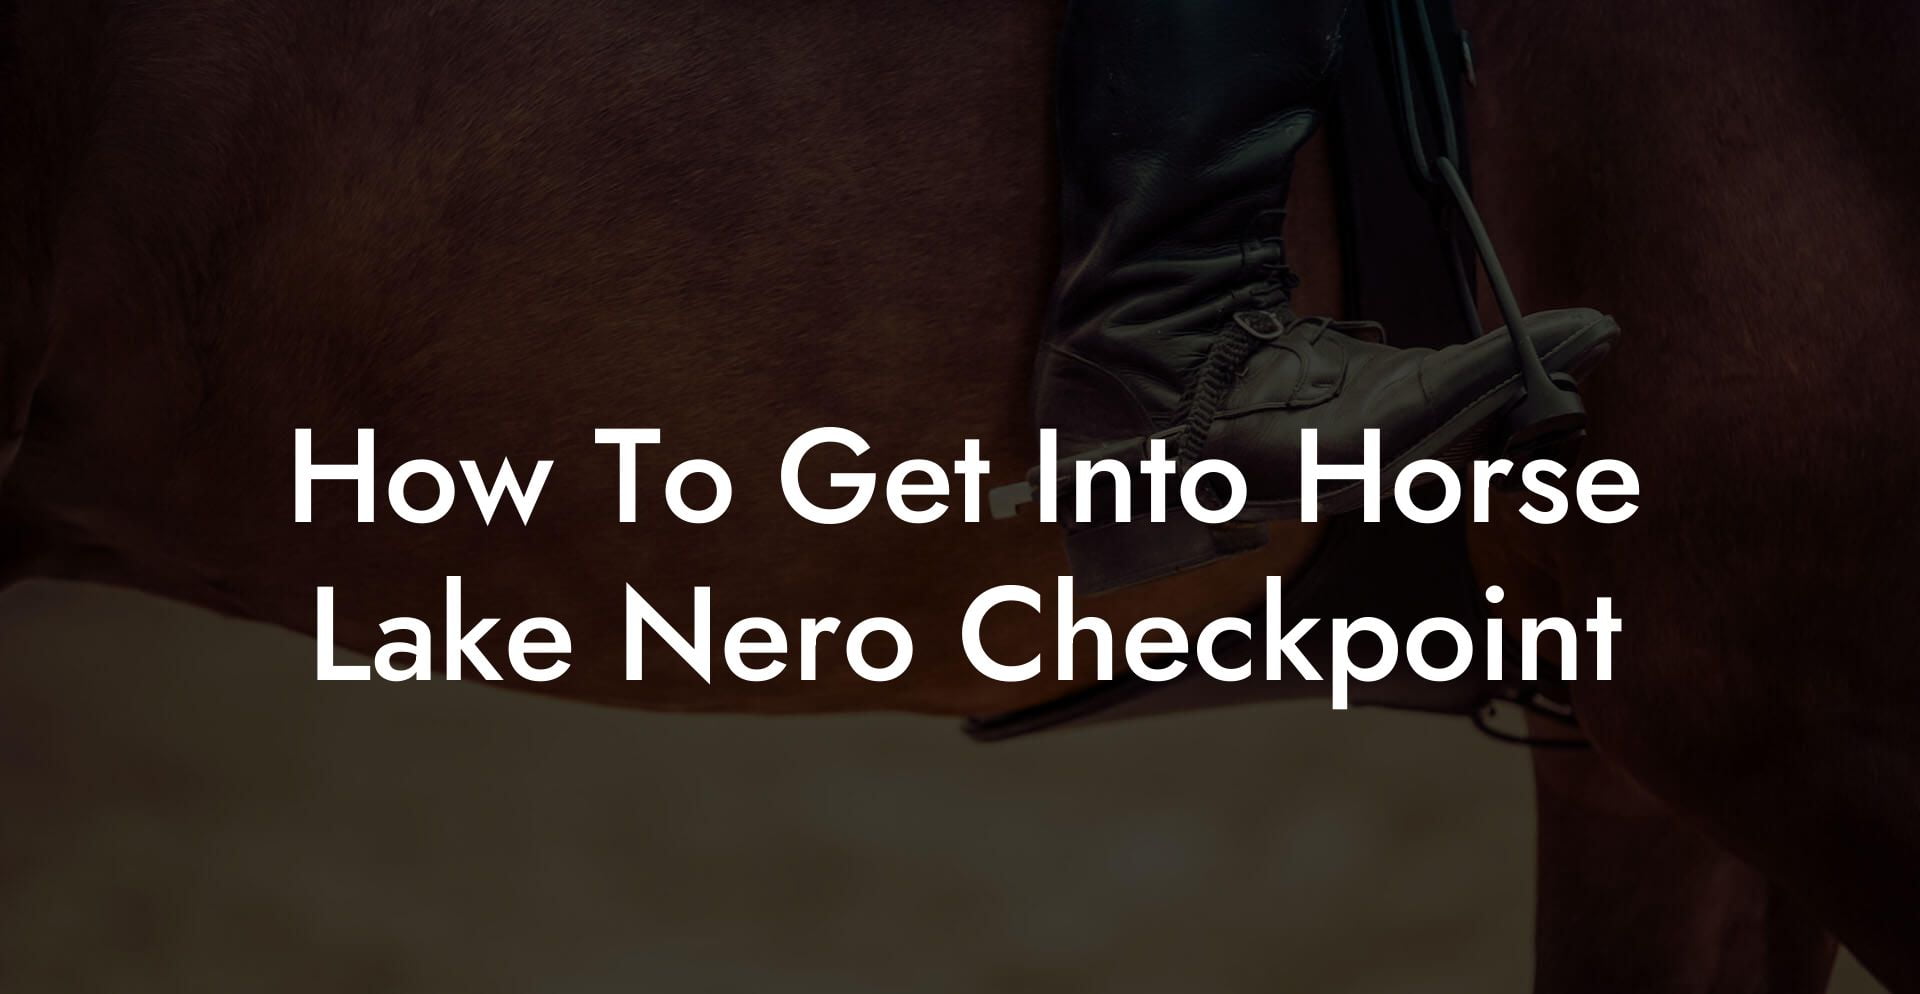 How To Get Into Horse Lake Nero Checkpoint